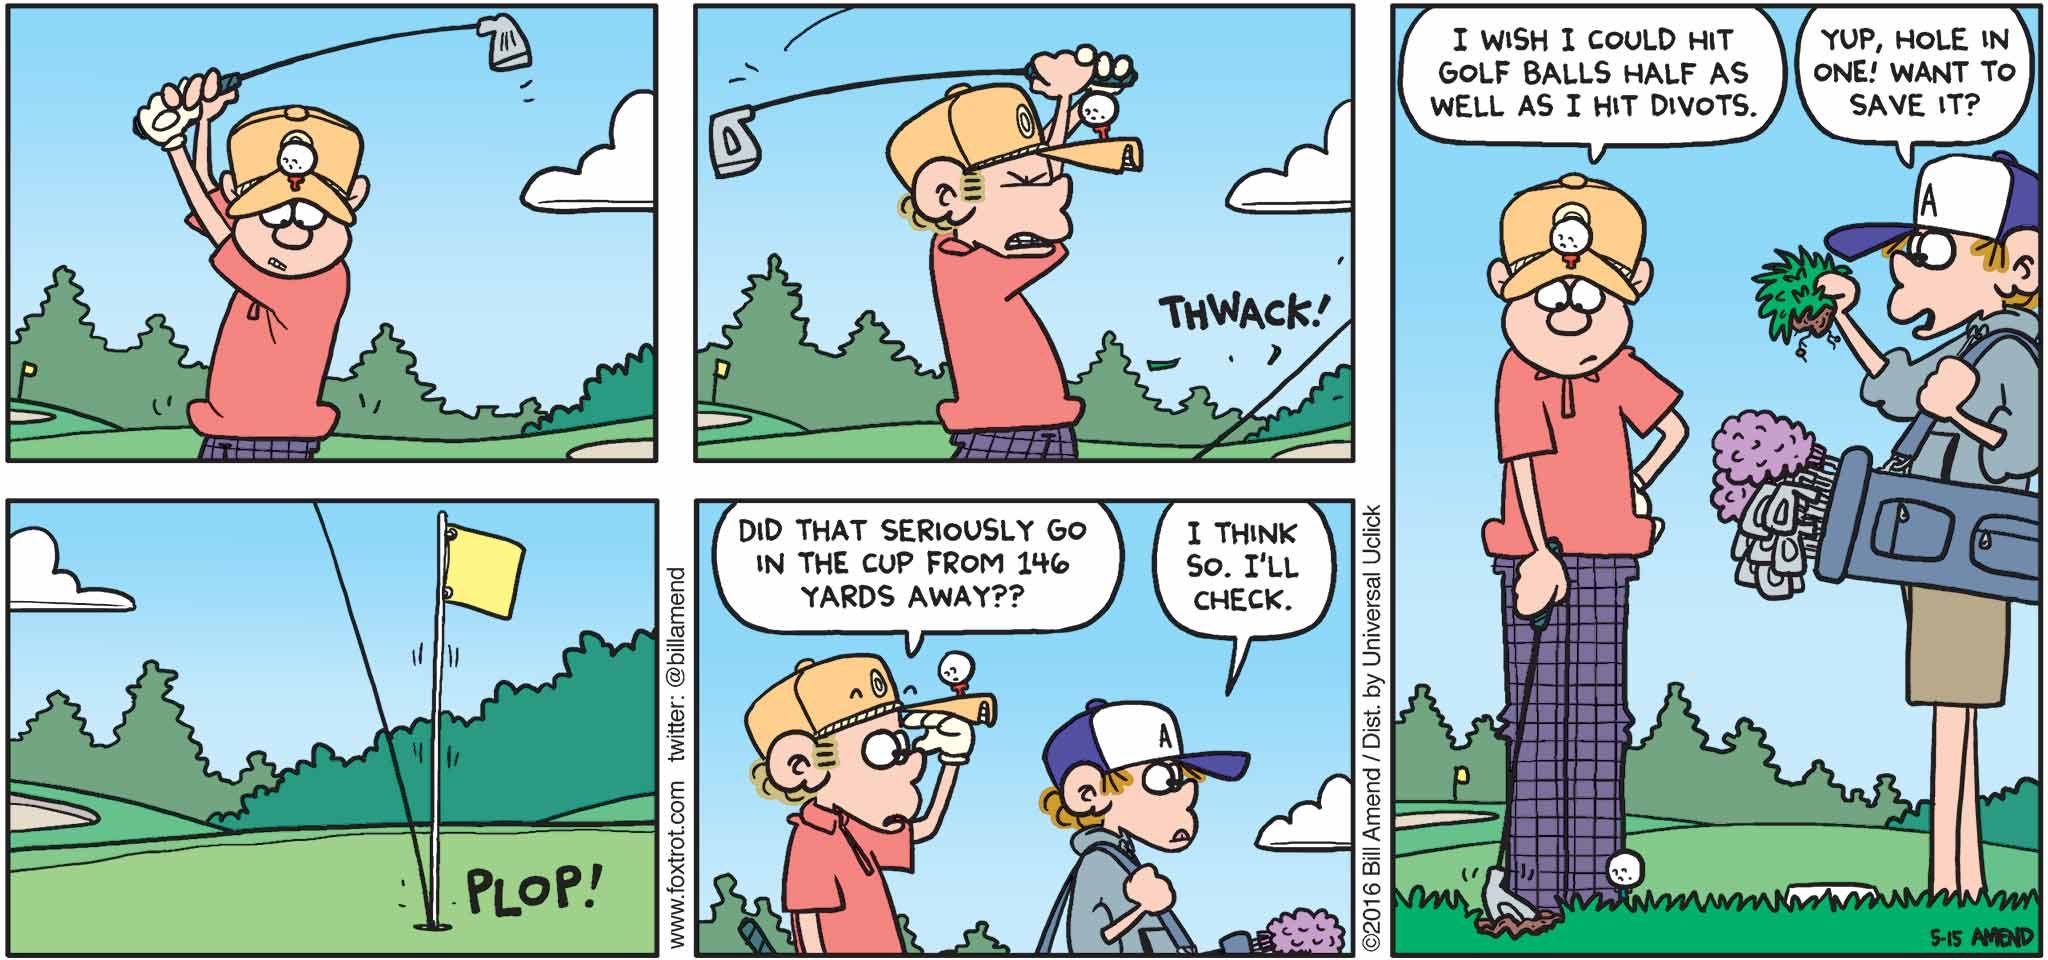 FoxTrot by Bill Amend - "Holed It" published May 22, 2016 - Roger: Did that seriously go in the cup from 146 yards away?? Peter: I think so. I'll check. Roger: I wish I could hit golf balls half as well as I hit divots. Peter: Yup, hole in one! Want to save it?